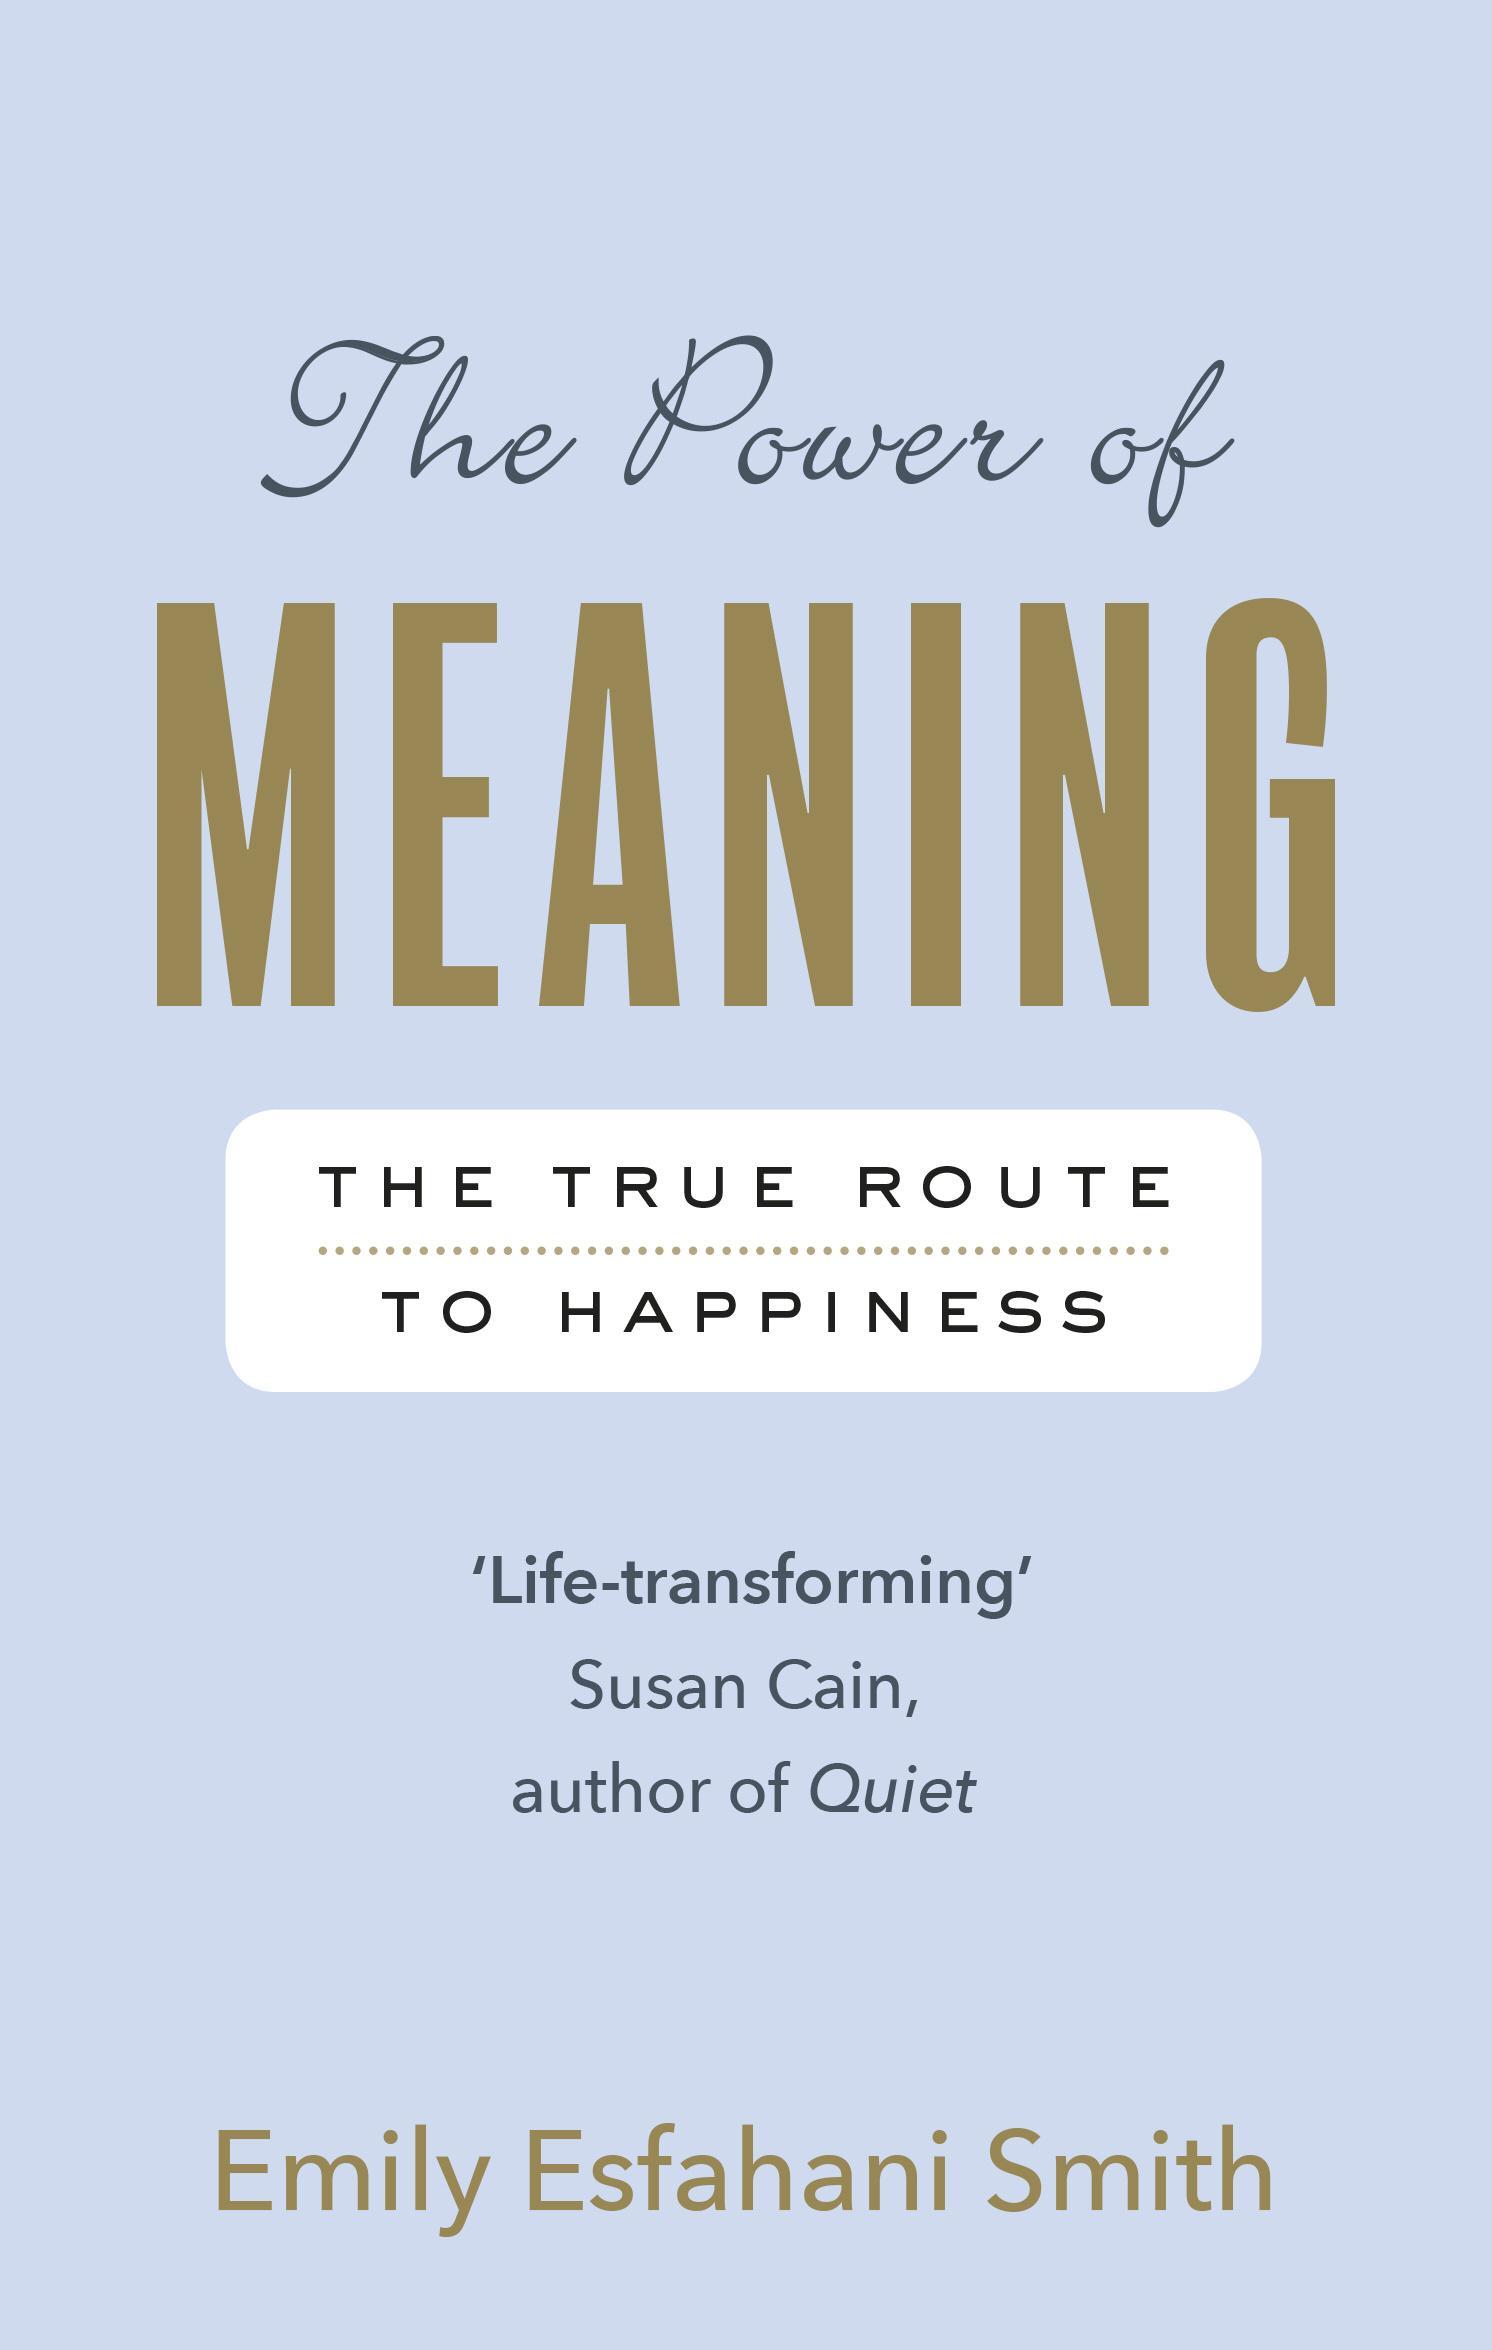 Power of Meaning